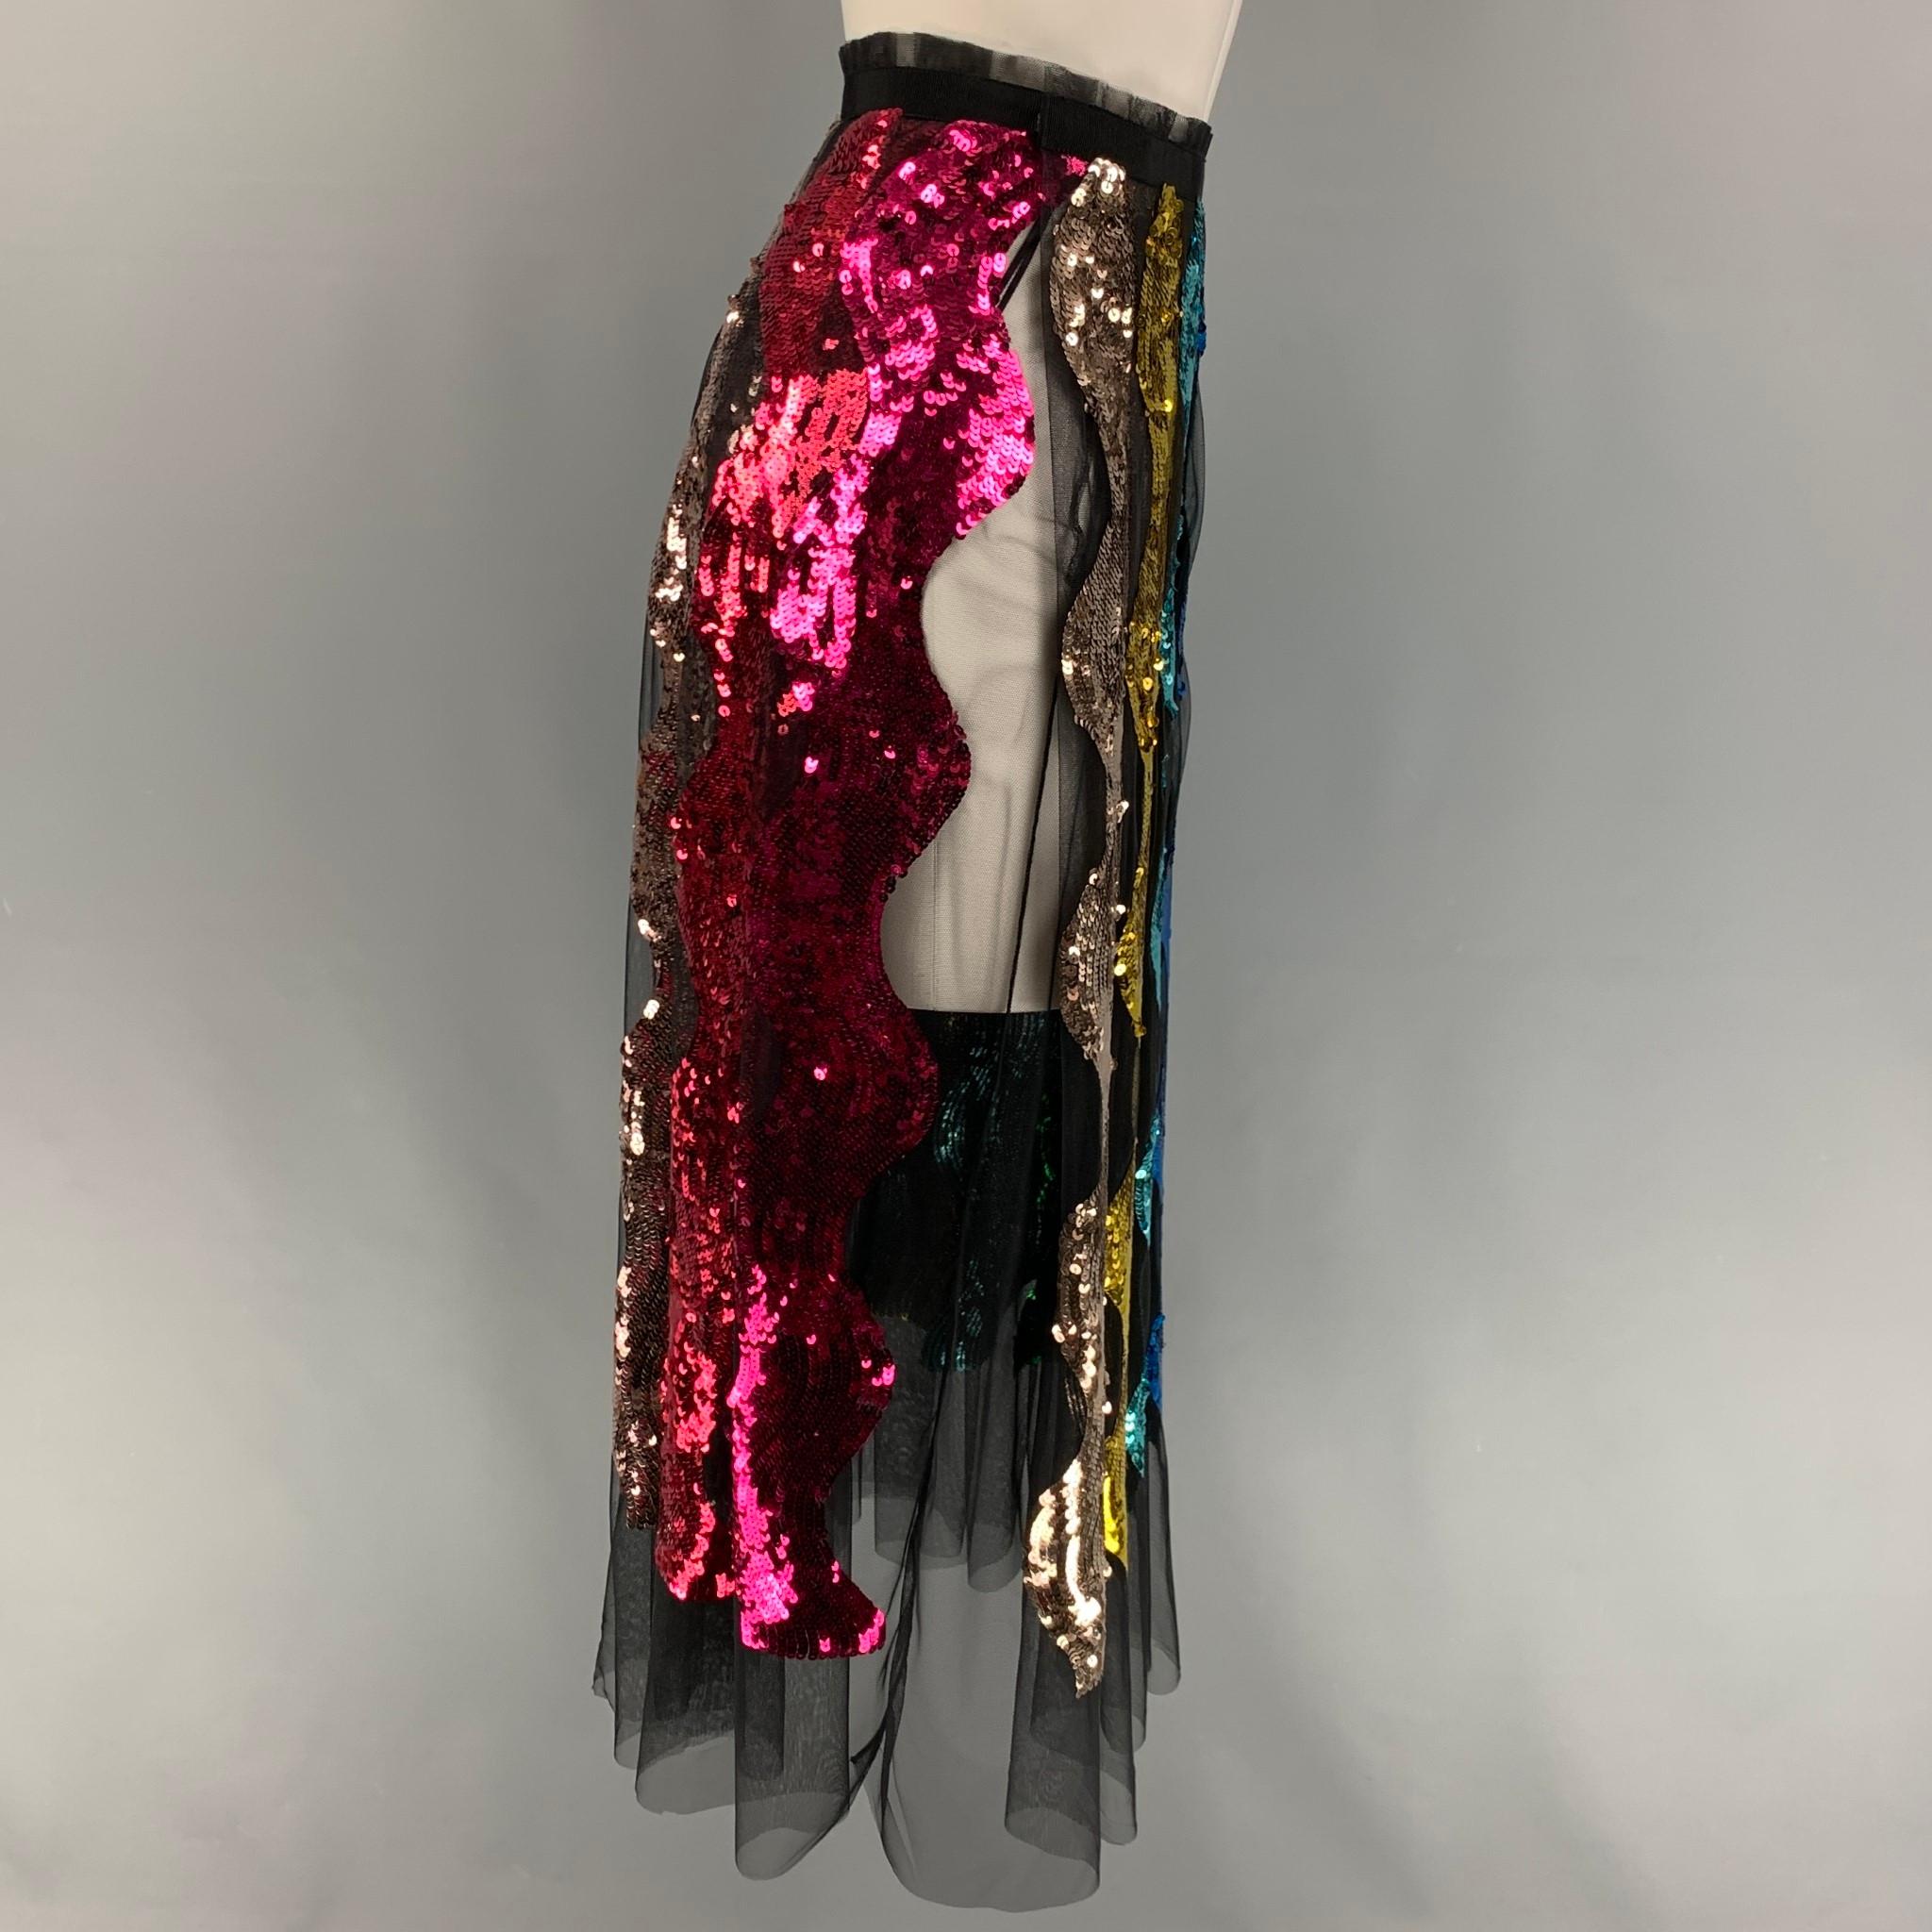 GUCCI FW 16 skirt comes in a multi-color tulle silk / elastane with a sequin embroidered snake print design, maxi style, and a side button & zipper closure. 

Excellent Pre-Owned Condition.
Marked: 40

Measurements:

Waist: 26 in.
Hip: 34